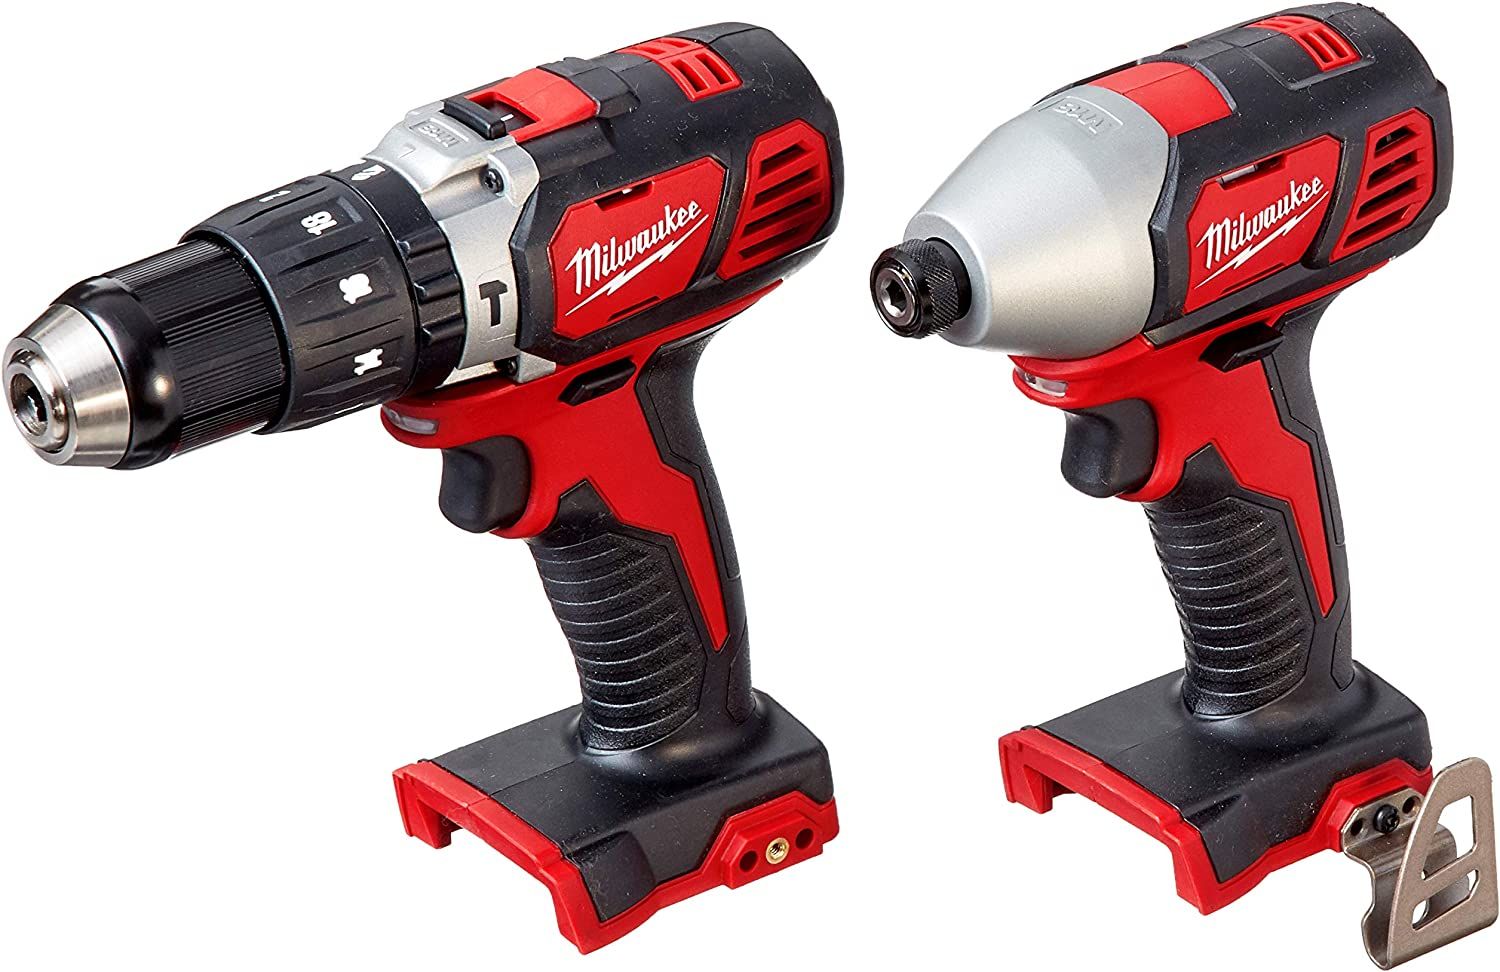 Milwaukee 2695-24 M18 18V Cordless Power Tool Combo Kit with Hammer Drill,  Impact Driver, Reciprocating Saw and Work Light, Batteries, Charger and  Tool Case Included